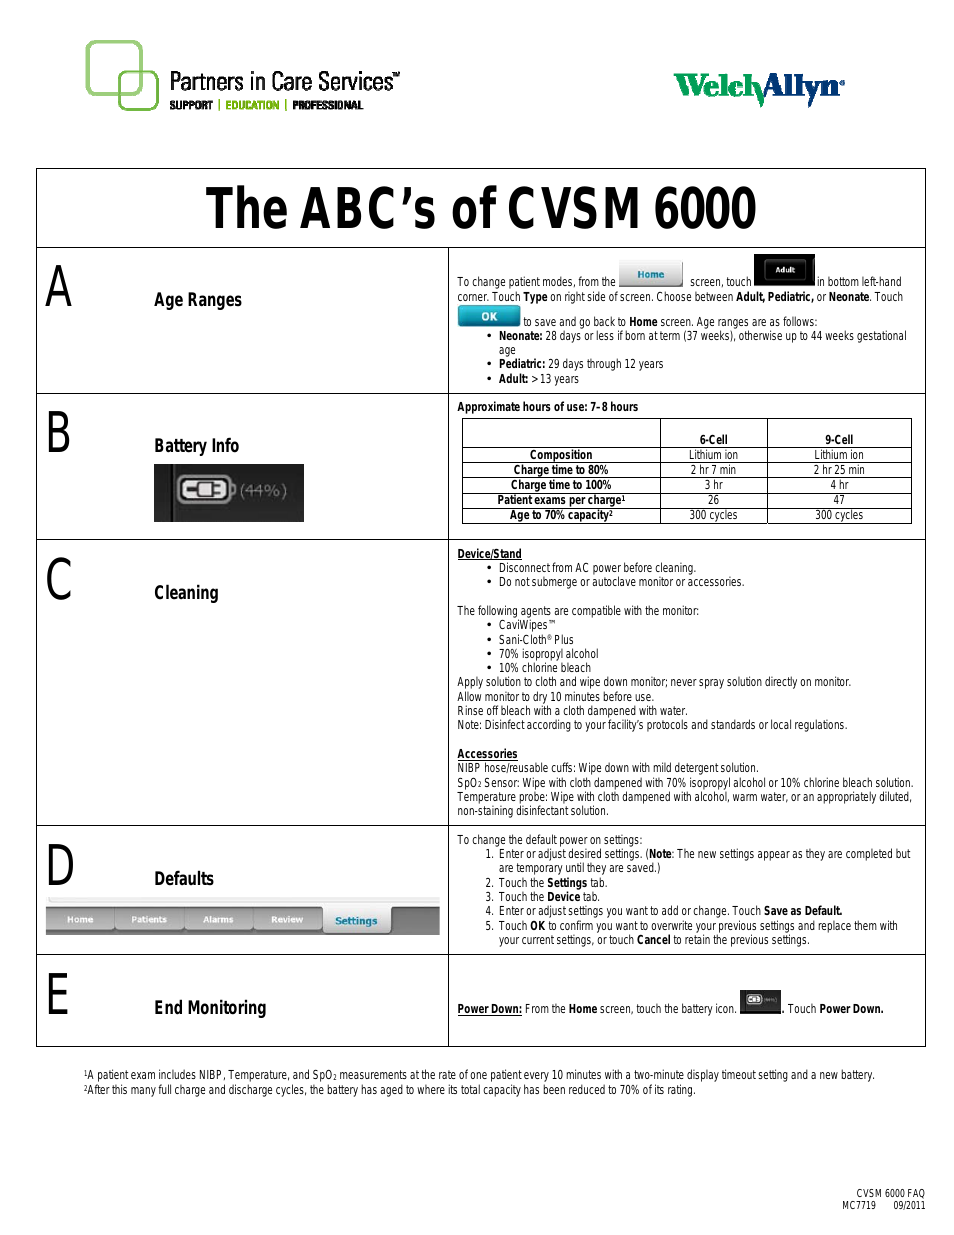 ABCs of CVSM 6000 - Quick Reference Guide